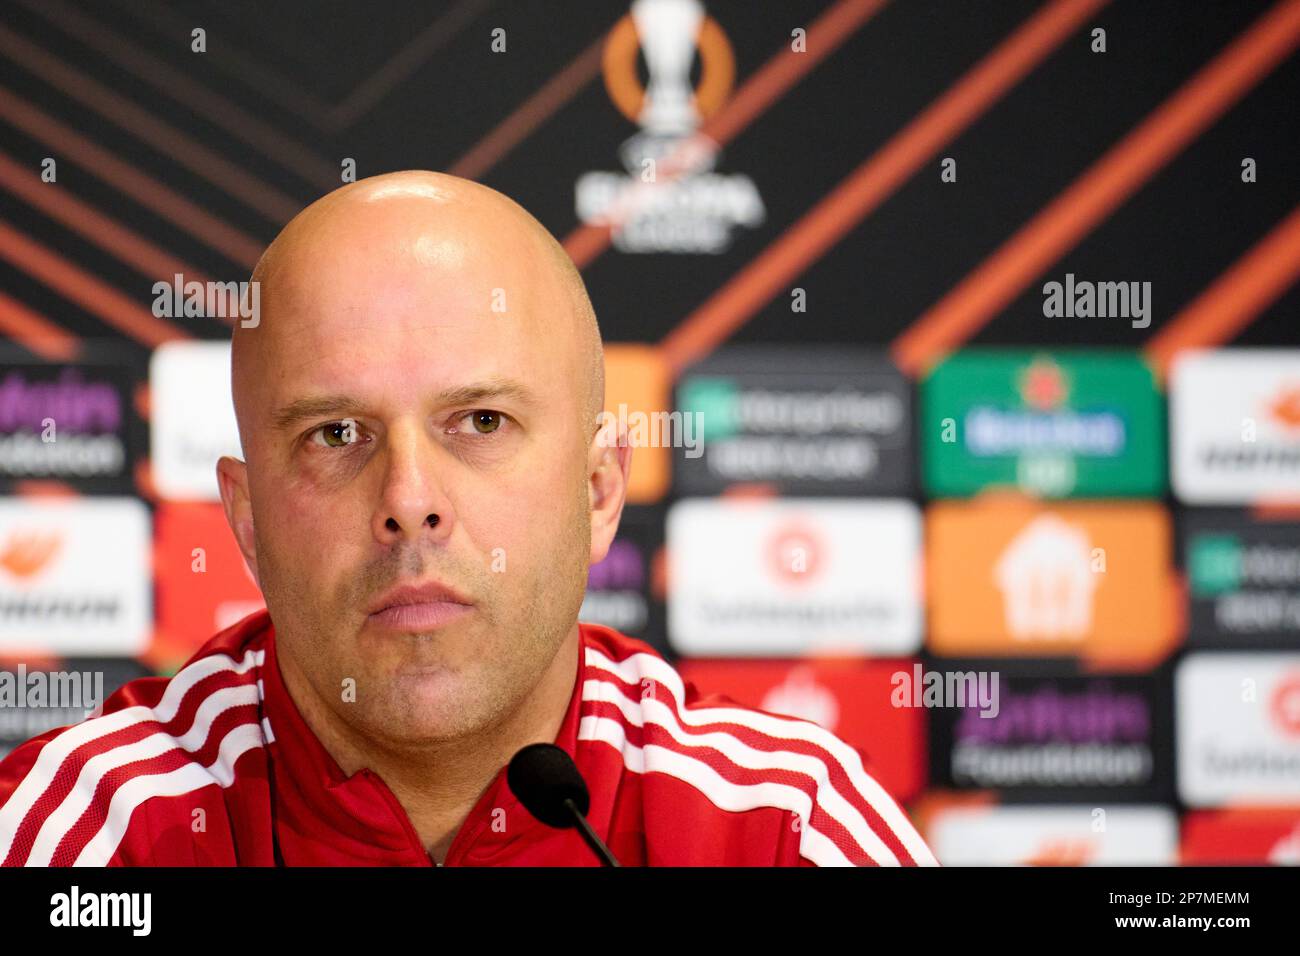 Warsaw - Feyenoord coach Arne Slot during the press conference and training of Feyenoord at Stadion Wojska Polskiego on 8 March 2023 in Warsaw, Poland. (Box to Box Pictures/Tom Bode) Stock Photo